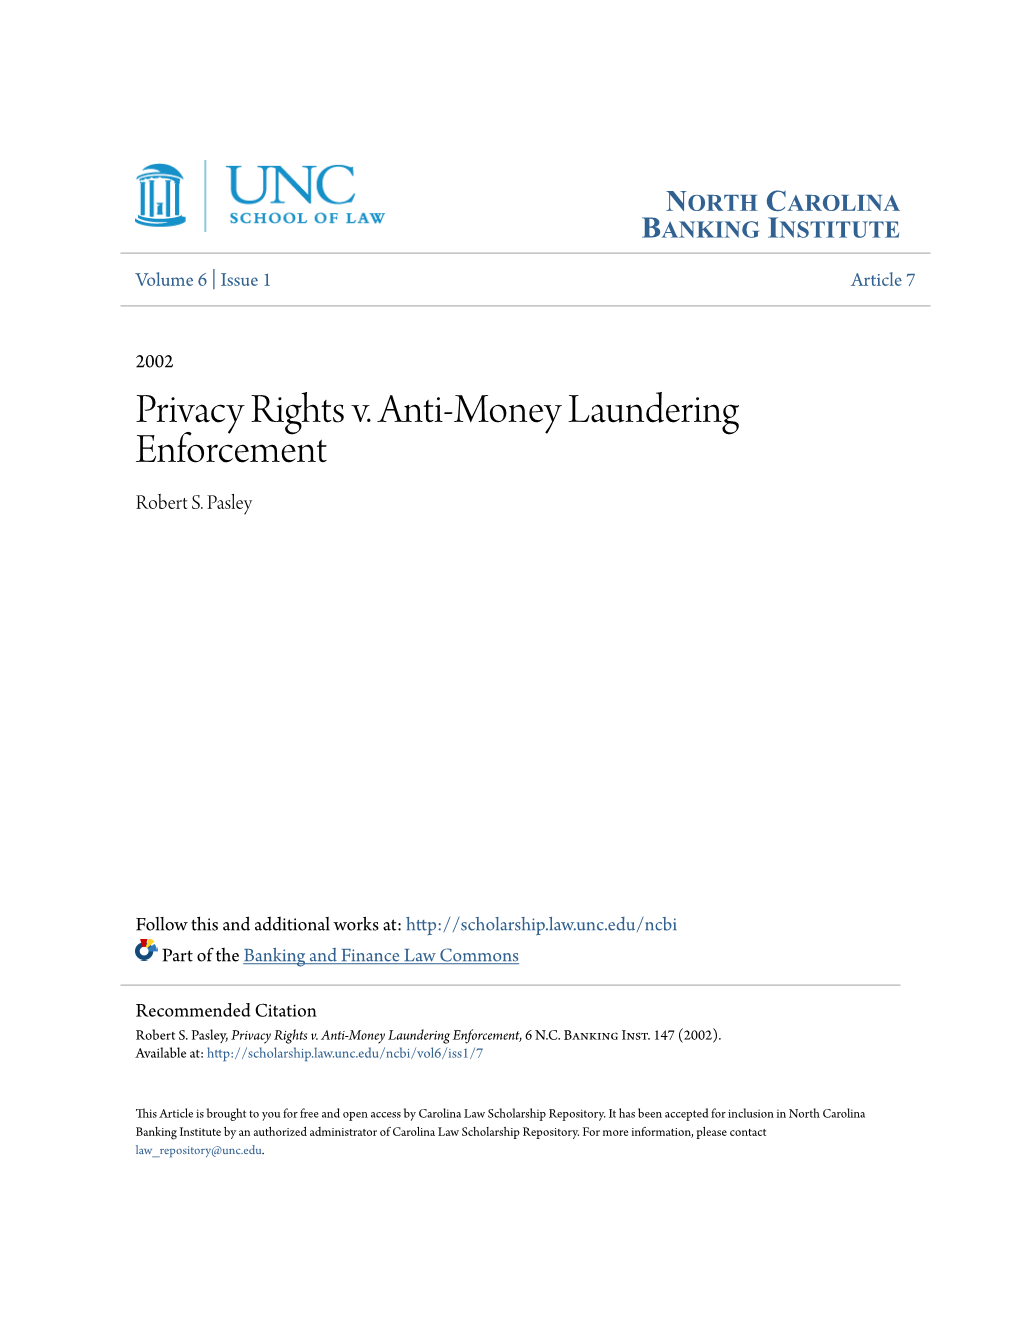 Privacy Rights V. Anti-Money Laundering Enforcement Robert S